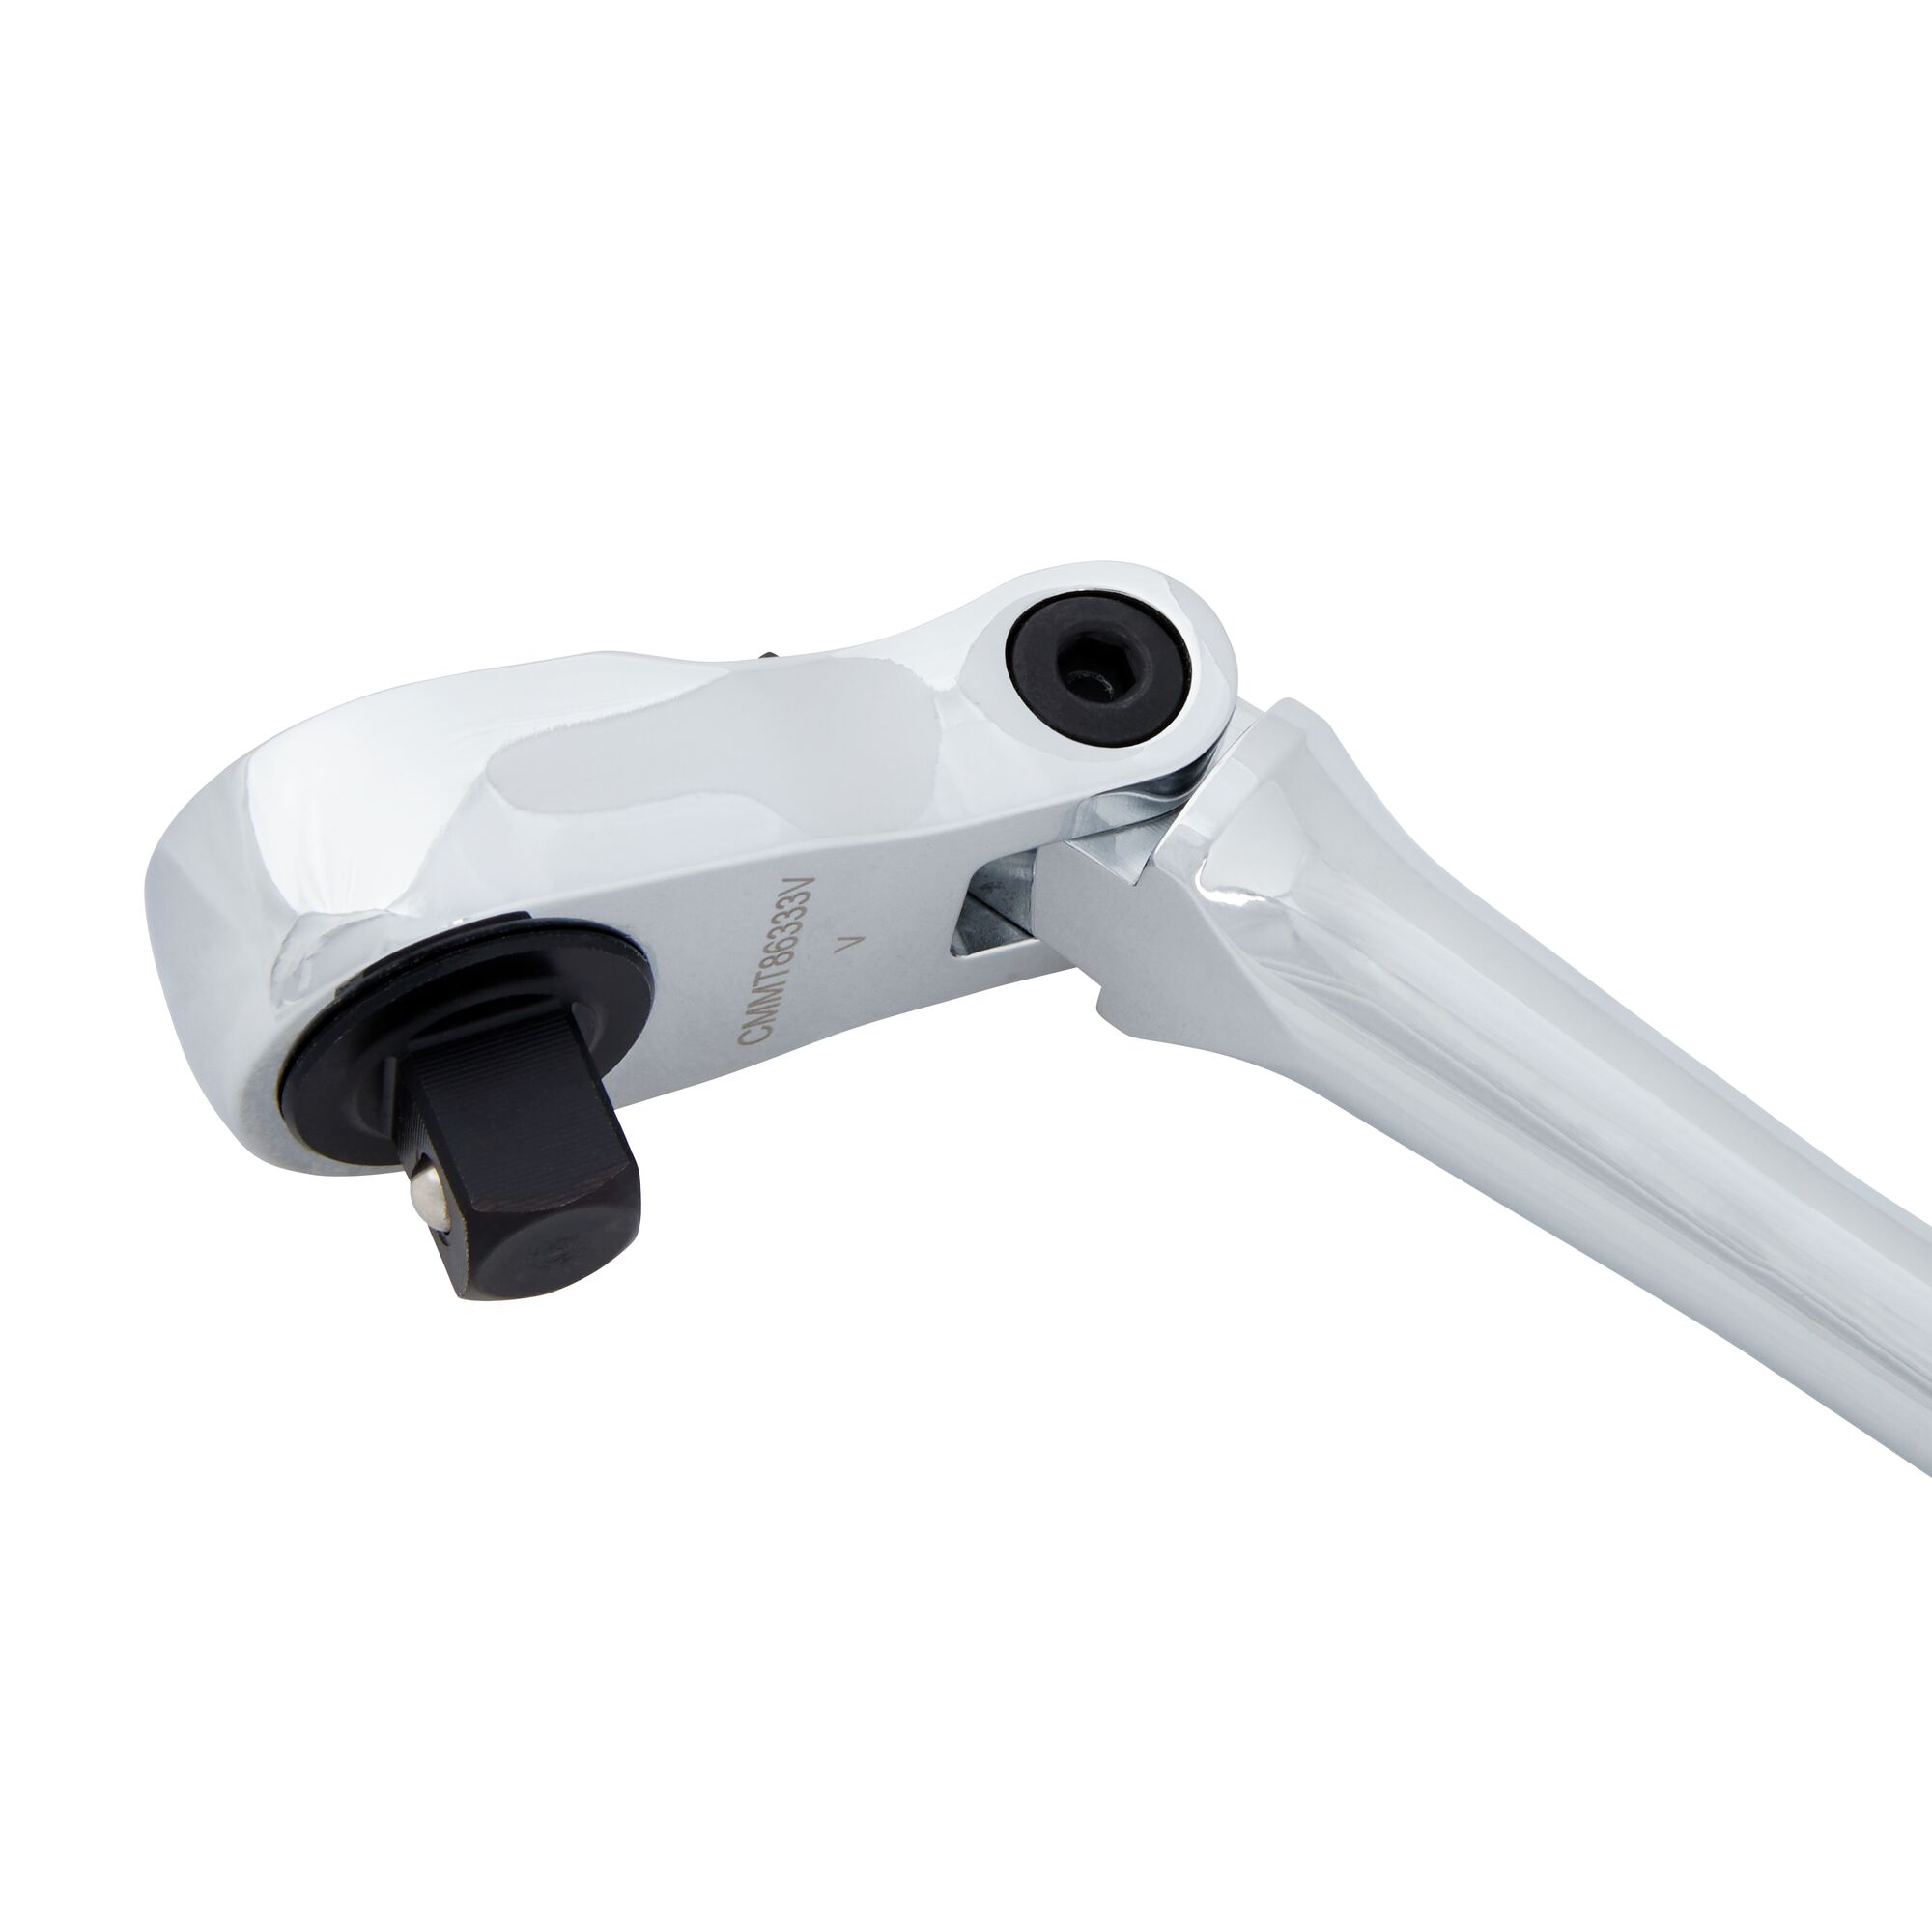 180 degrees articulating head feature in V series half inch drive long flex head ratchet.